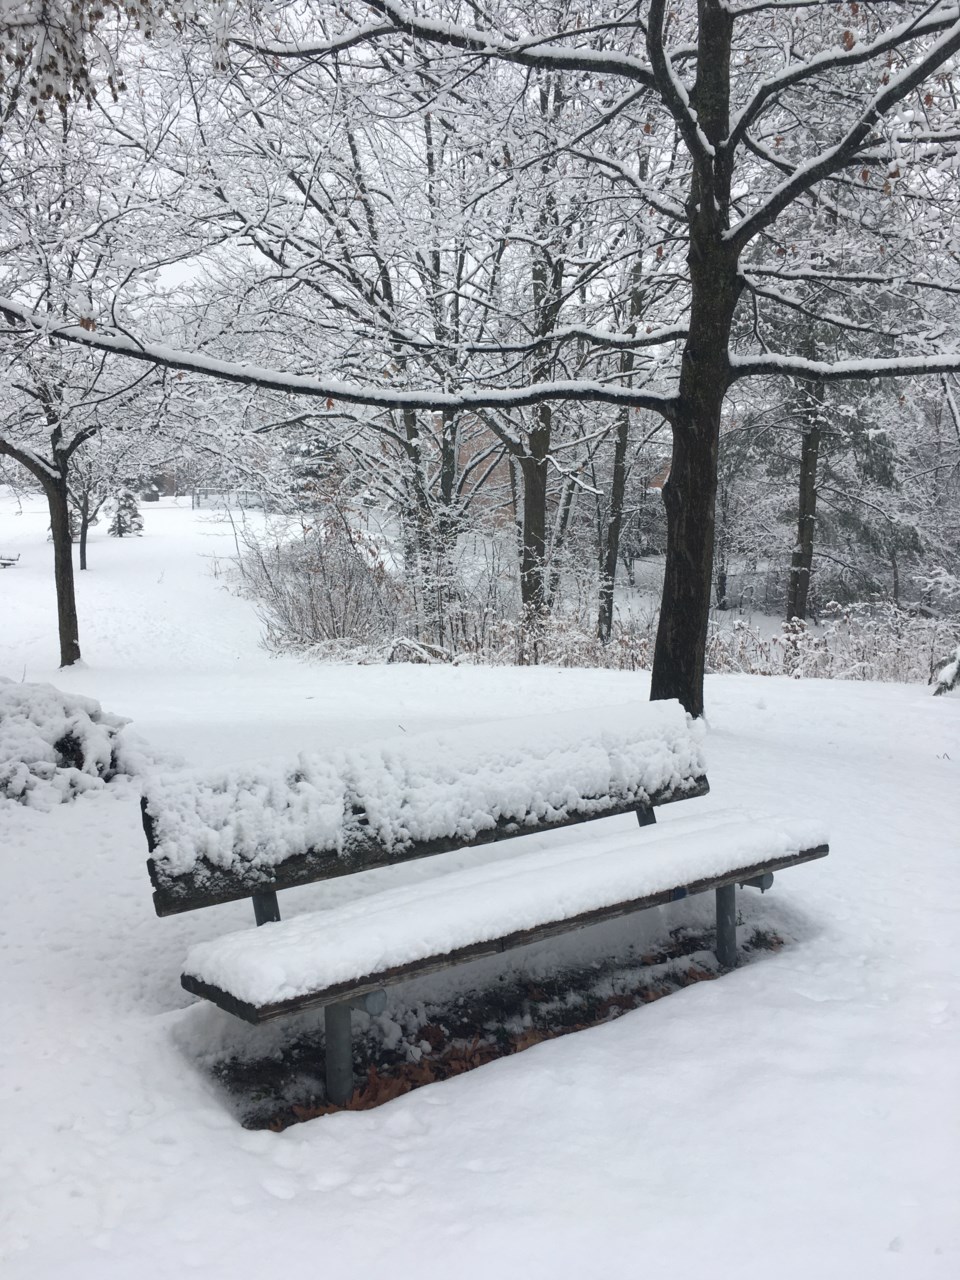 USED 2020-12-27 Snow bench